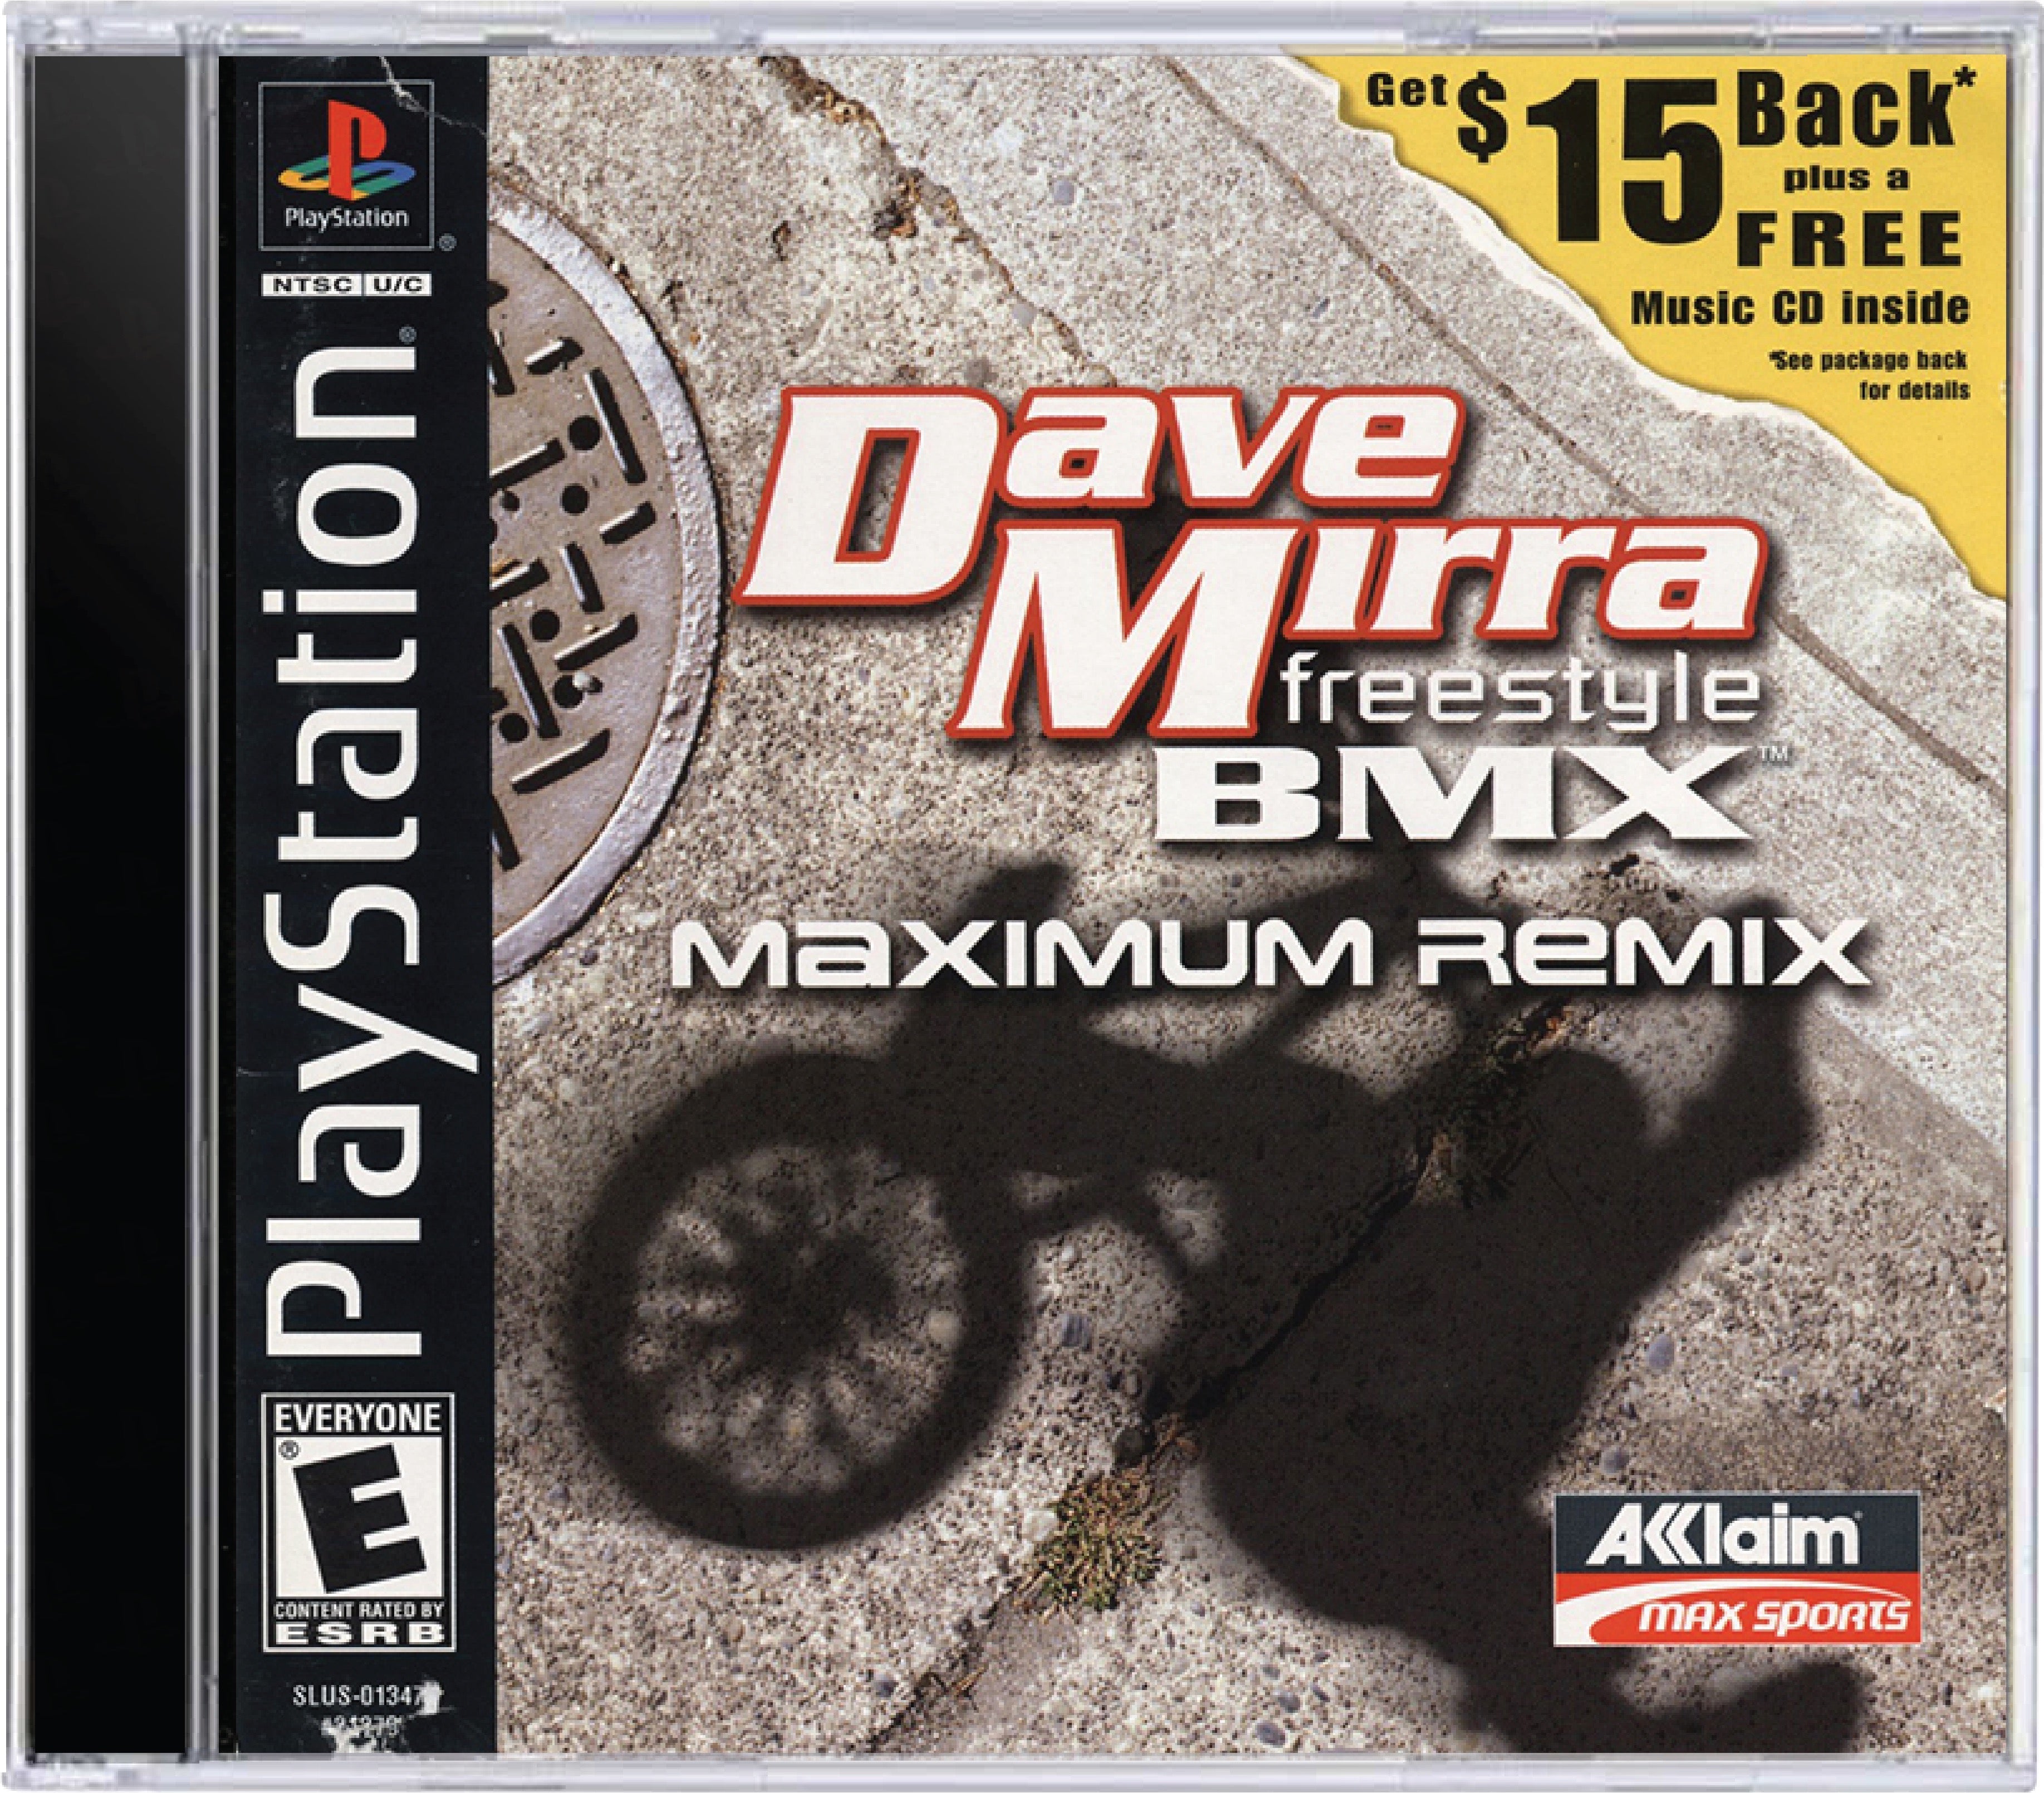 Dave Mirra Freestyle BMX Maximum Remix Cover Art and Product Photo